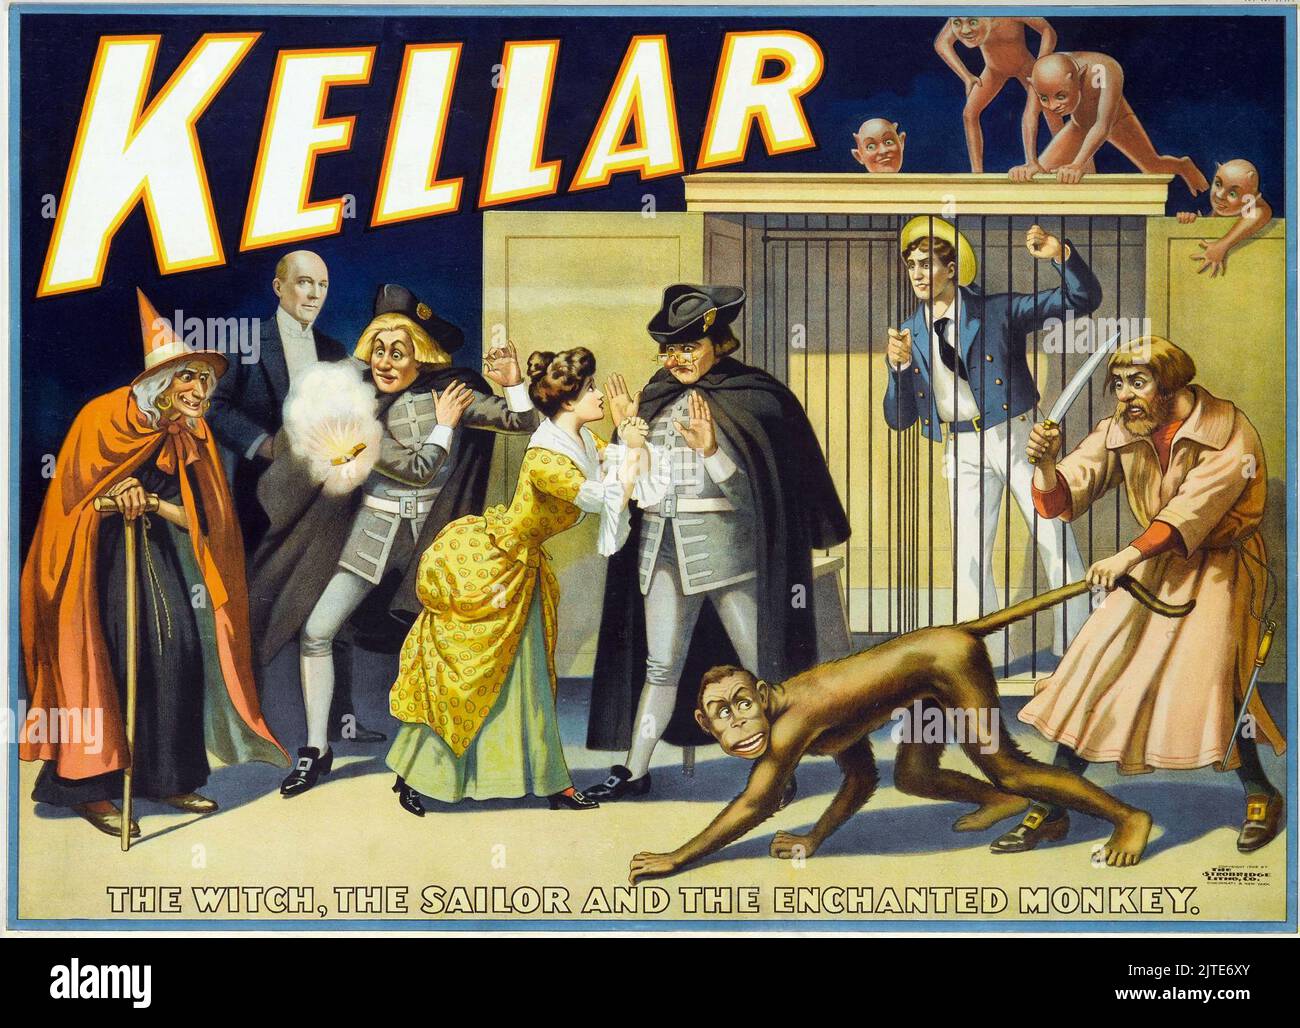 Vintage 1920s Magician Poster - Kellar: The Witch,the Sailor and the Enchanted Monkey Stock Photo